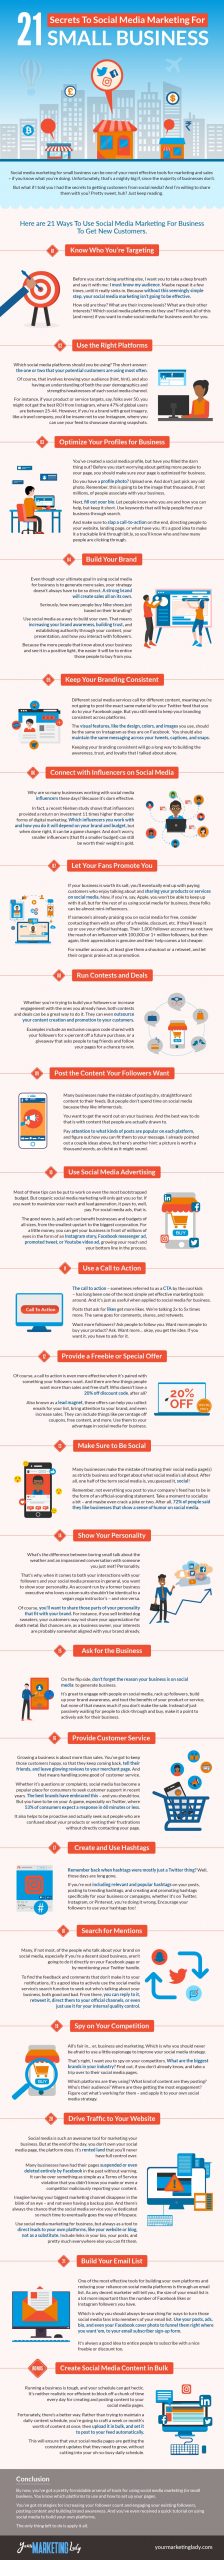 , 21 Secrets to Social Media Marketing for Small Business [Infographic], TornCRM